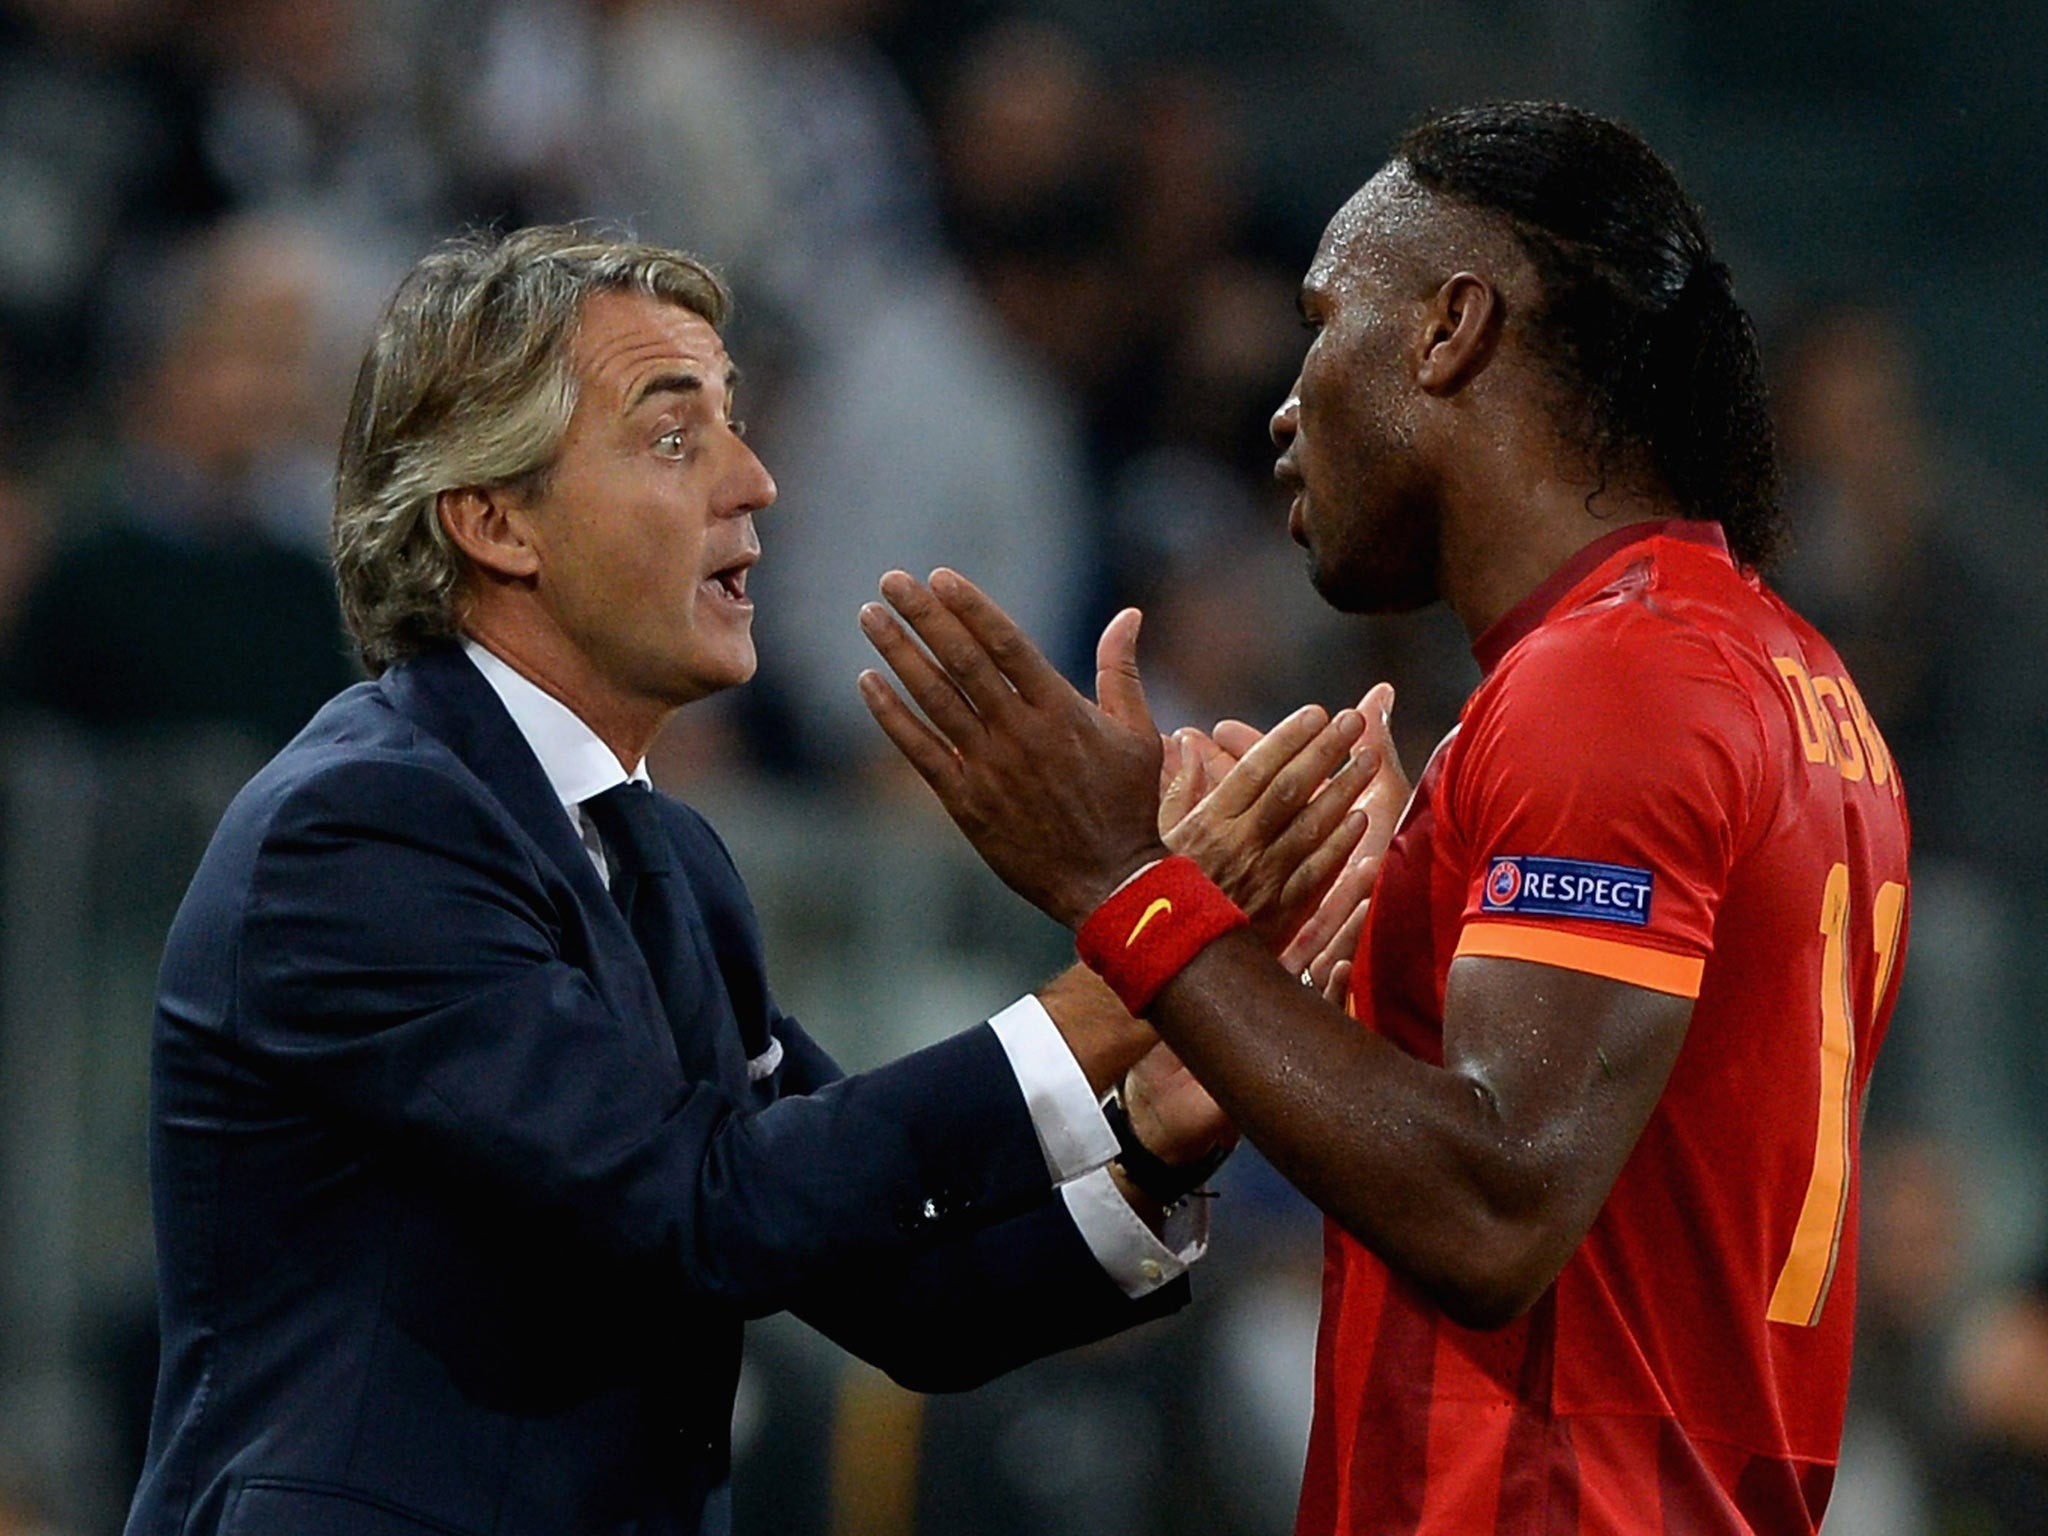 Off-the-field, Galatasaray have pedigree too. Roberto Mancini left Manchester City in 2013 and headed for the slightly warmer climes of Istanbul to take over the Turkish champions. He has had a successful start to his tenure, taking Galatasaray beyond the